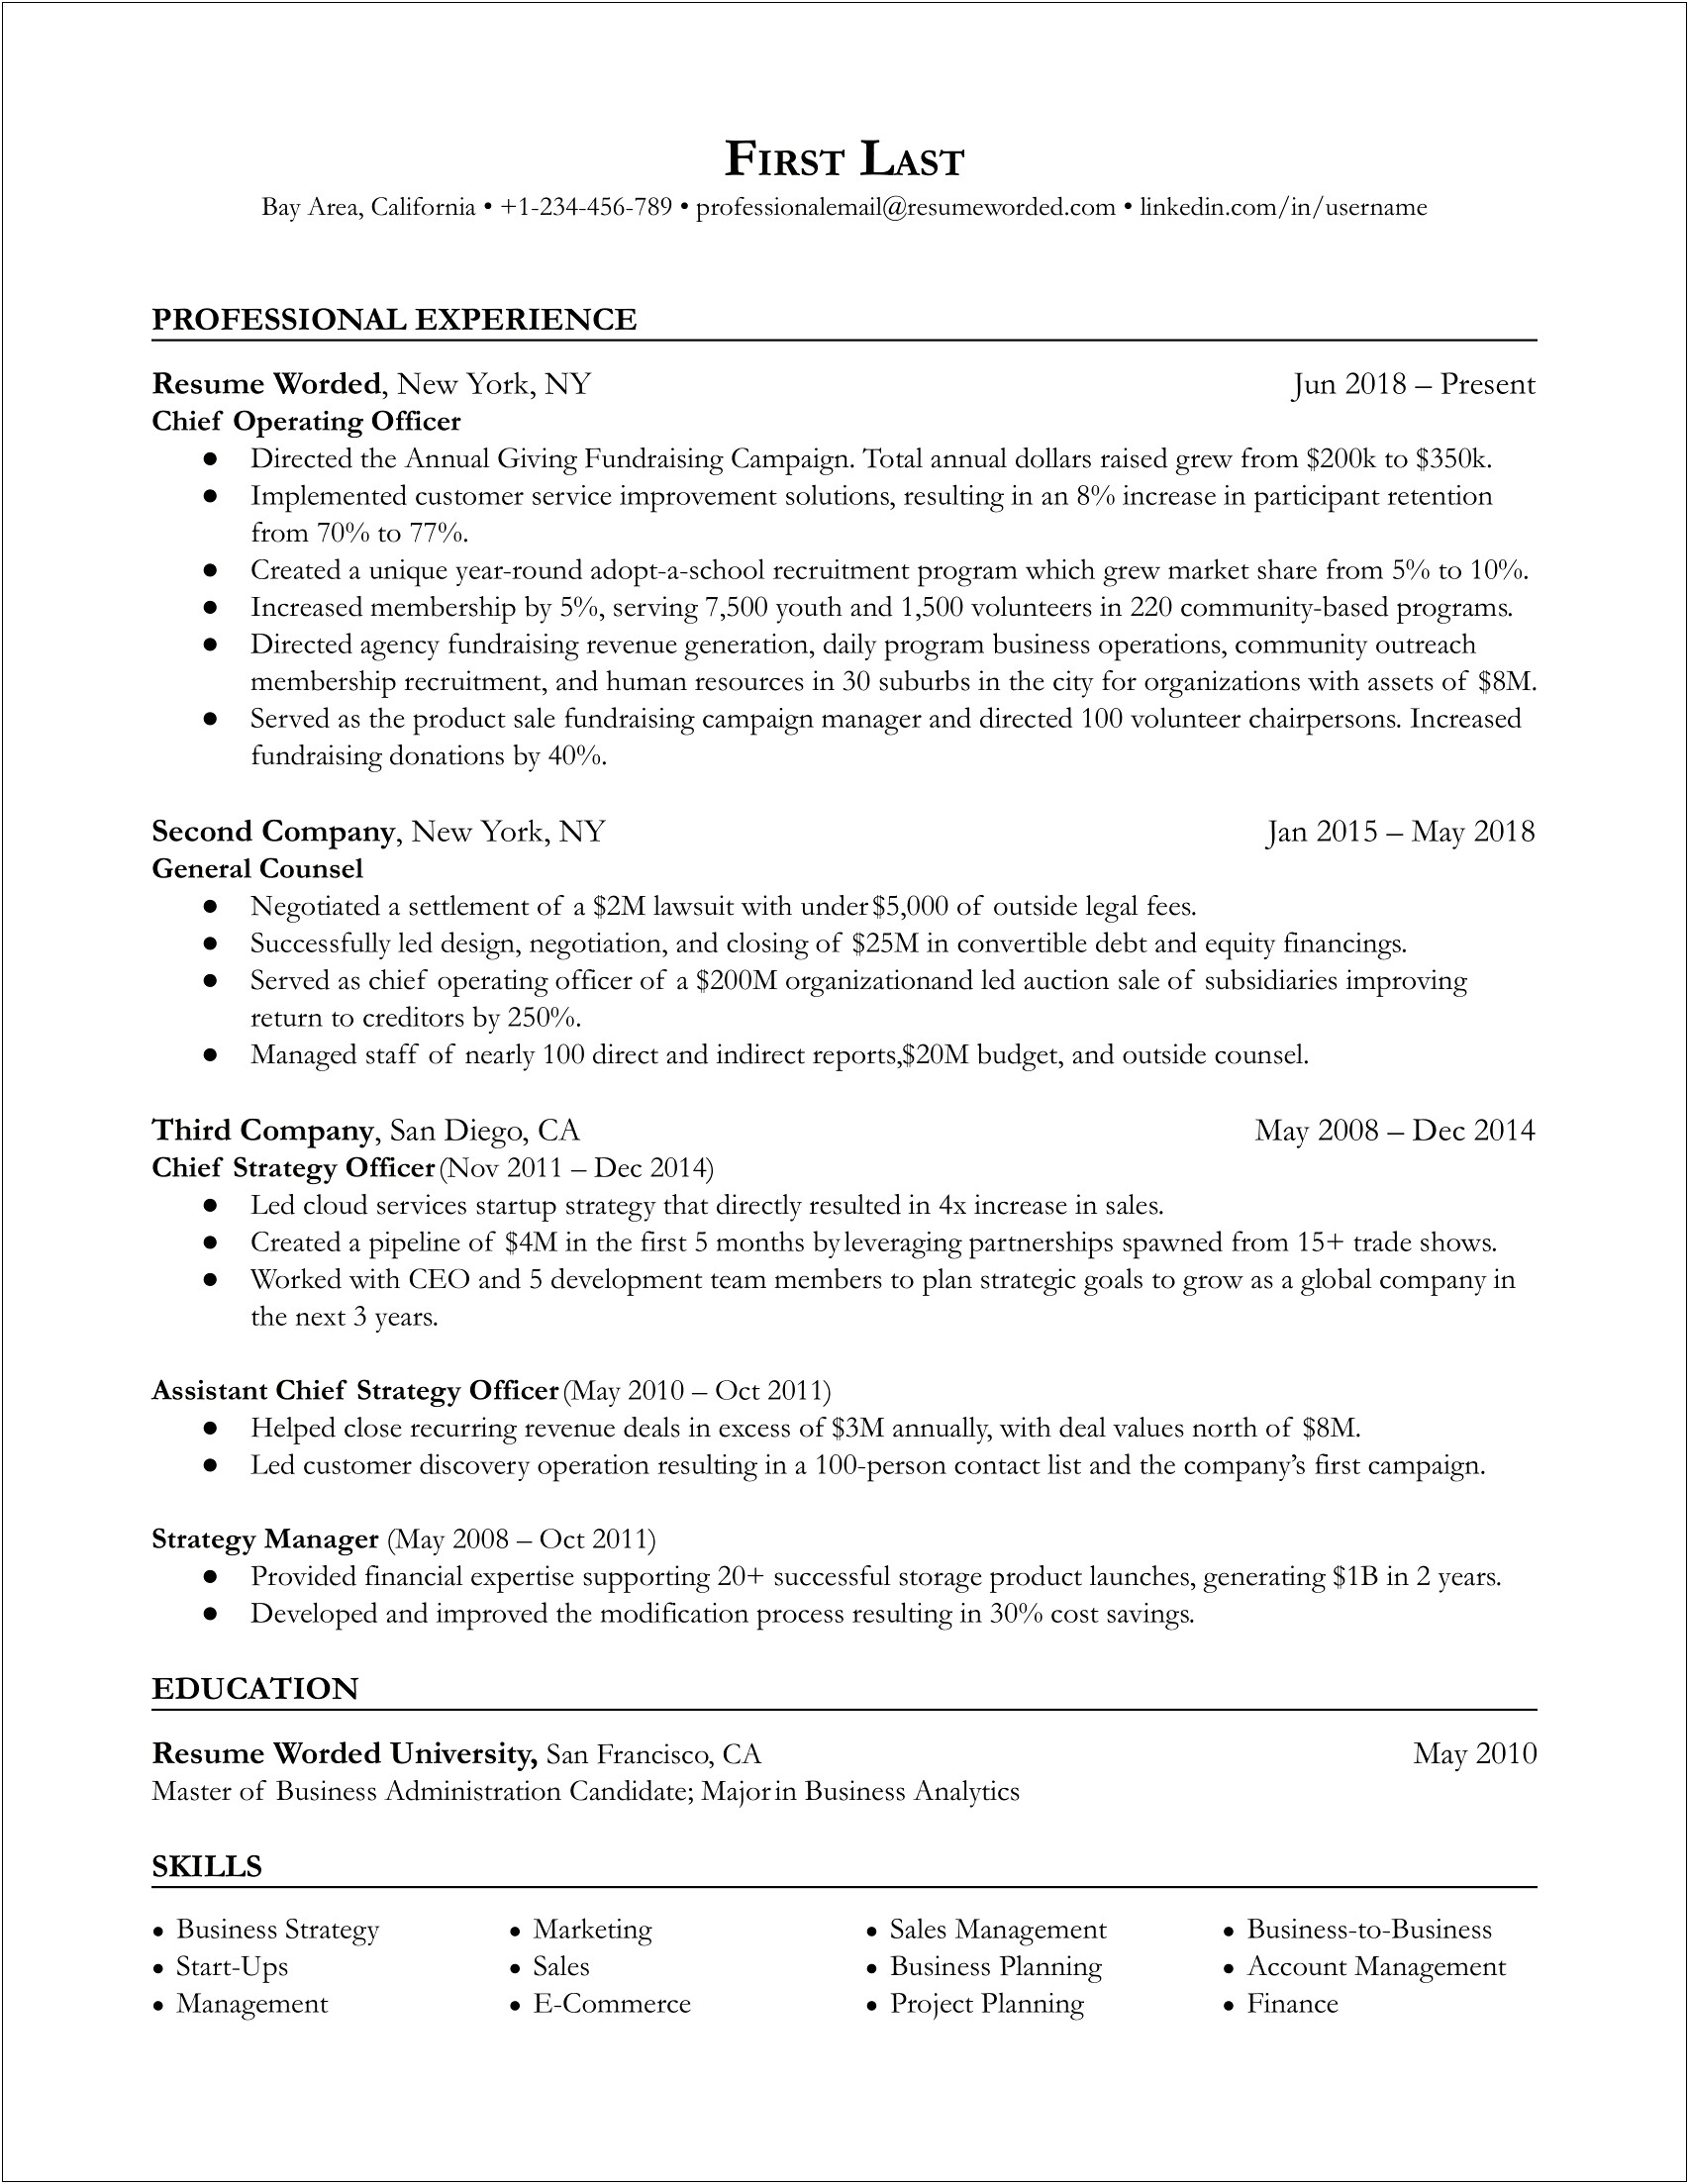 Resume About C And Net Entry Level Jobs